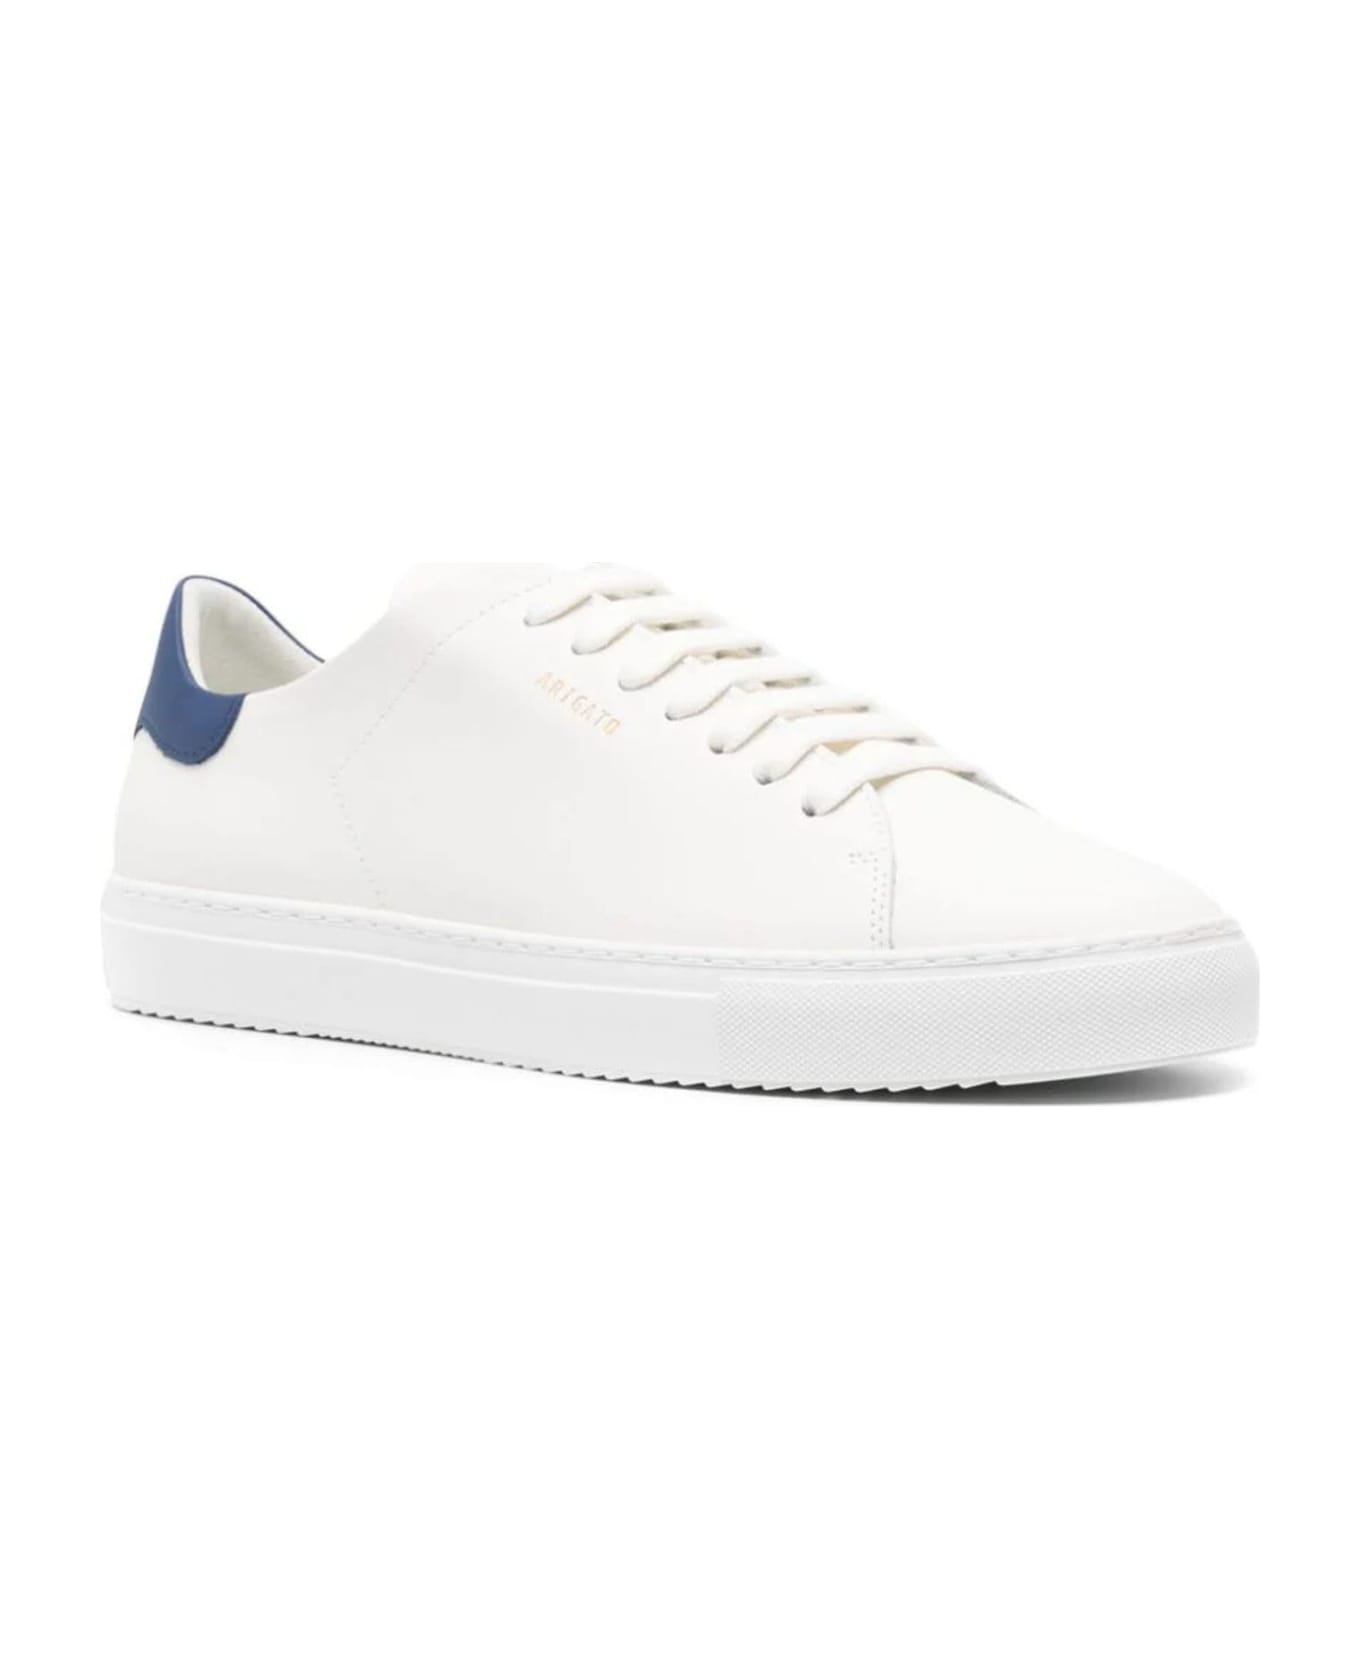 Axel Arigato White Clean 90 Leather Sneakers - White Navy スニーカー